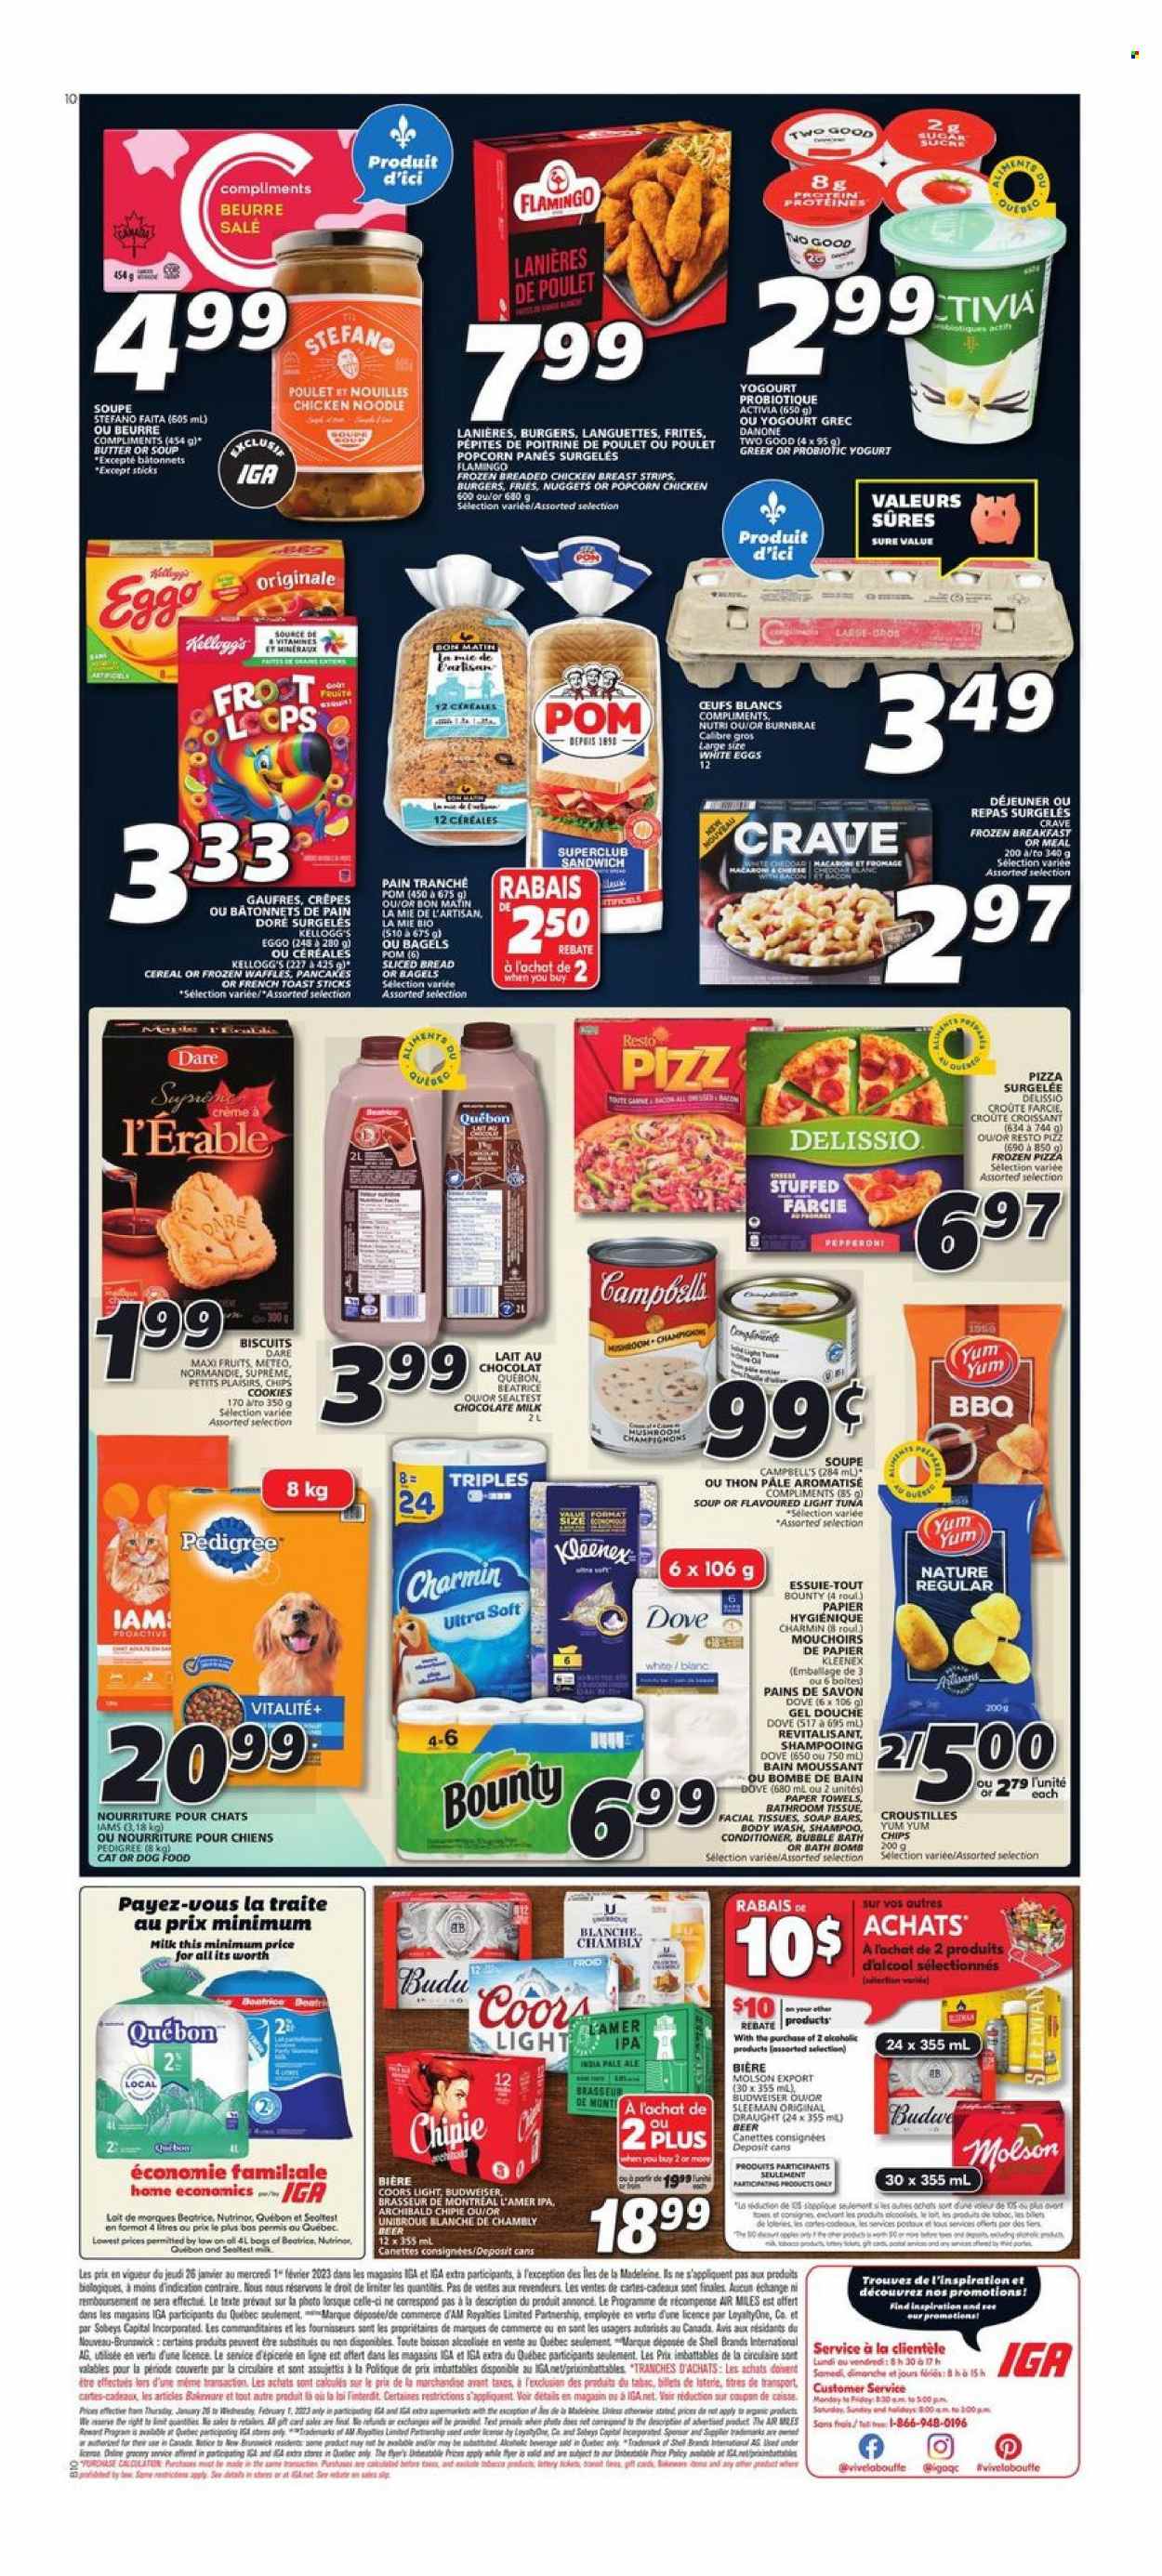 thumbnail - IGA Flyer - January 26, 2023 - February 01, 2023 - Sales products - bagels, bread, cake, waffles, Campbell's, pizza, macaroni, soup, nuggets, hamburger, fried chicken, noodles, bacon, pepperoni, yoghurt, probiotic yoghurt, milk, eggs, strips, potato fries, cookies, Dove, milk chocolate, chocolate, Bounty, Kellogg's, biscuit, popcorn, sugar, light tuna, cereals, beer, IPA, chicken, Budweiser, Danone, Coors. Page 2.